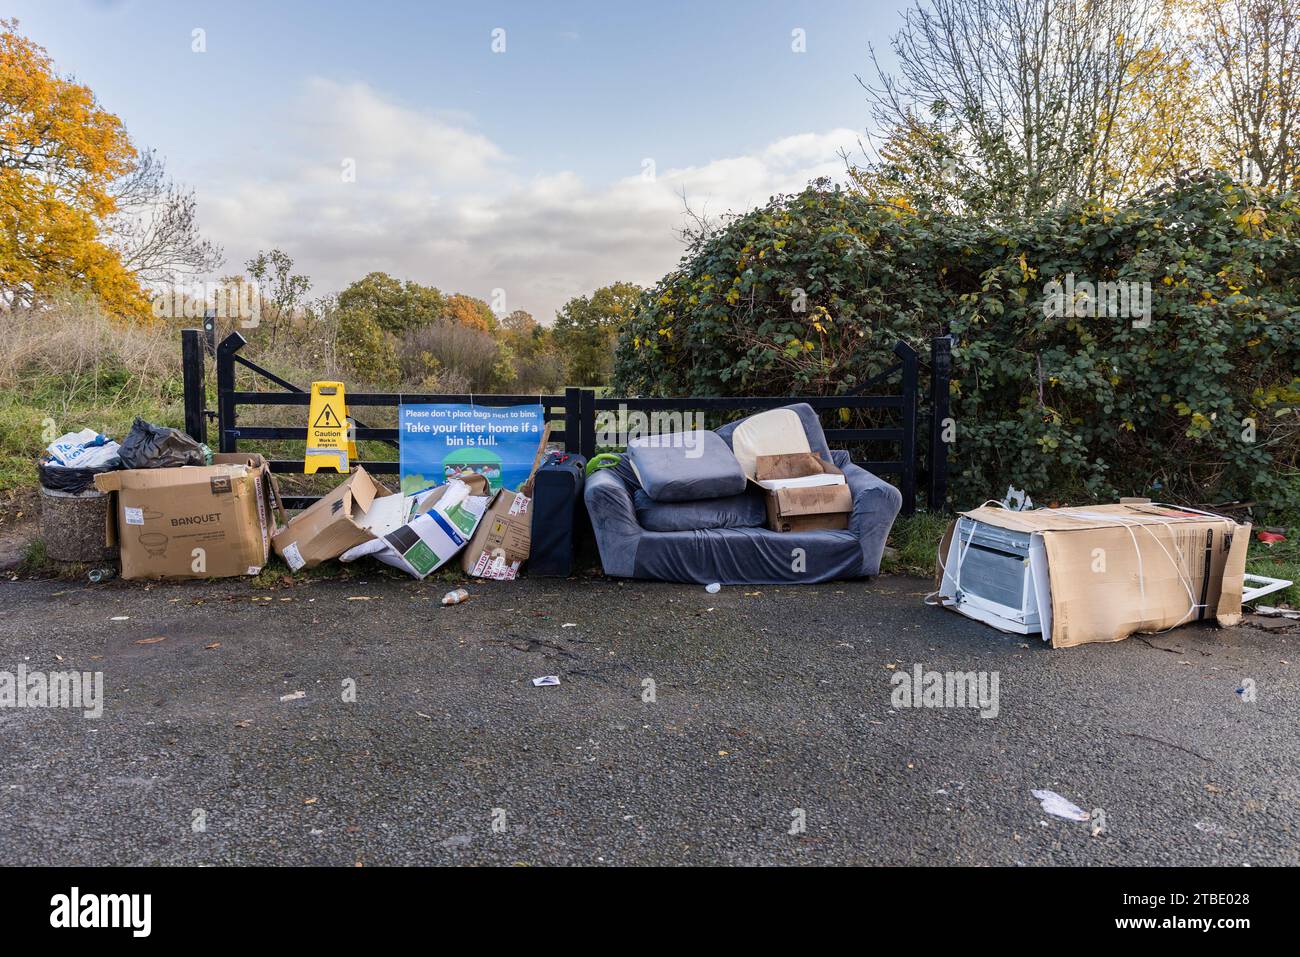 A fly tipping site including cardboard boxes, a couch, suitcase and fridge freezer by a 'Take Your Litter Home' banner. Photo by Amanda Rose/Alamy Stock Photo